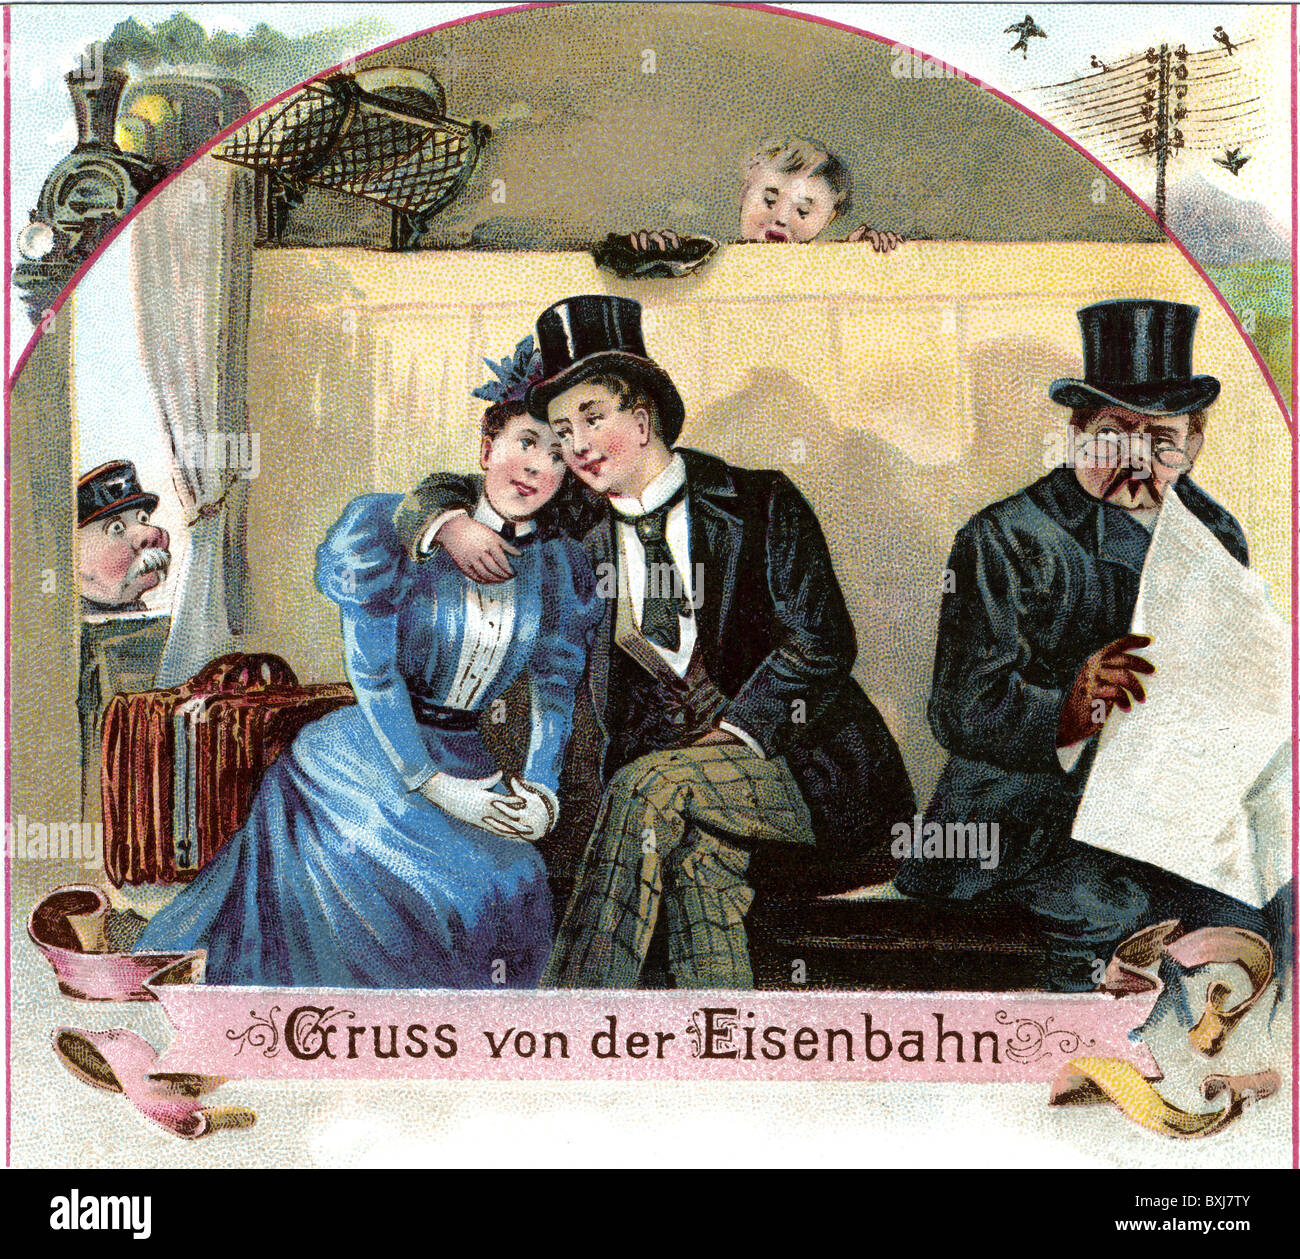 transport / transportation, railway, train traveler, lovers in train compartment, Germany, 1898, Additional-Rights-Clearences-Not Available Stock Photo